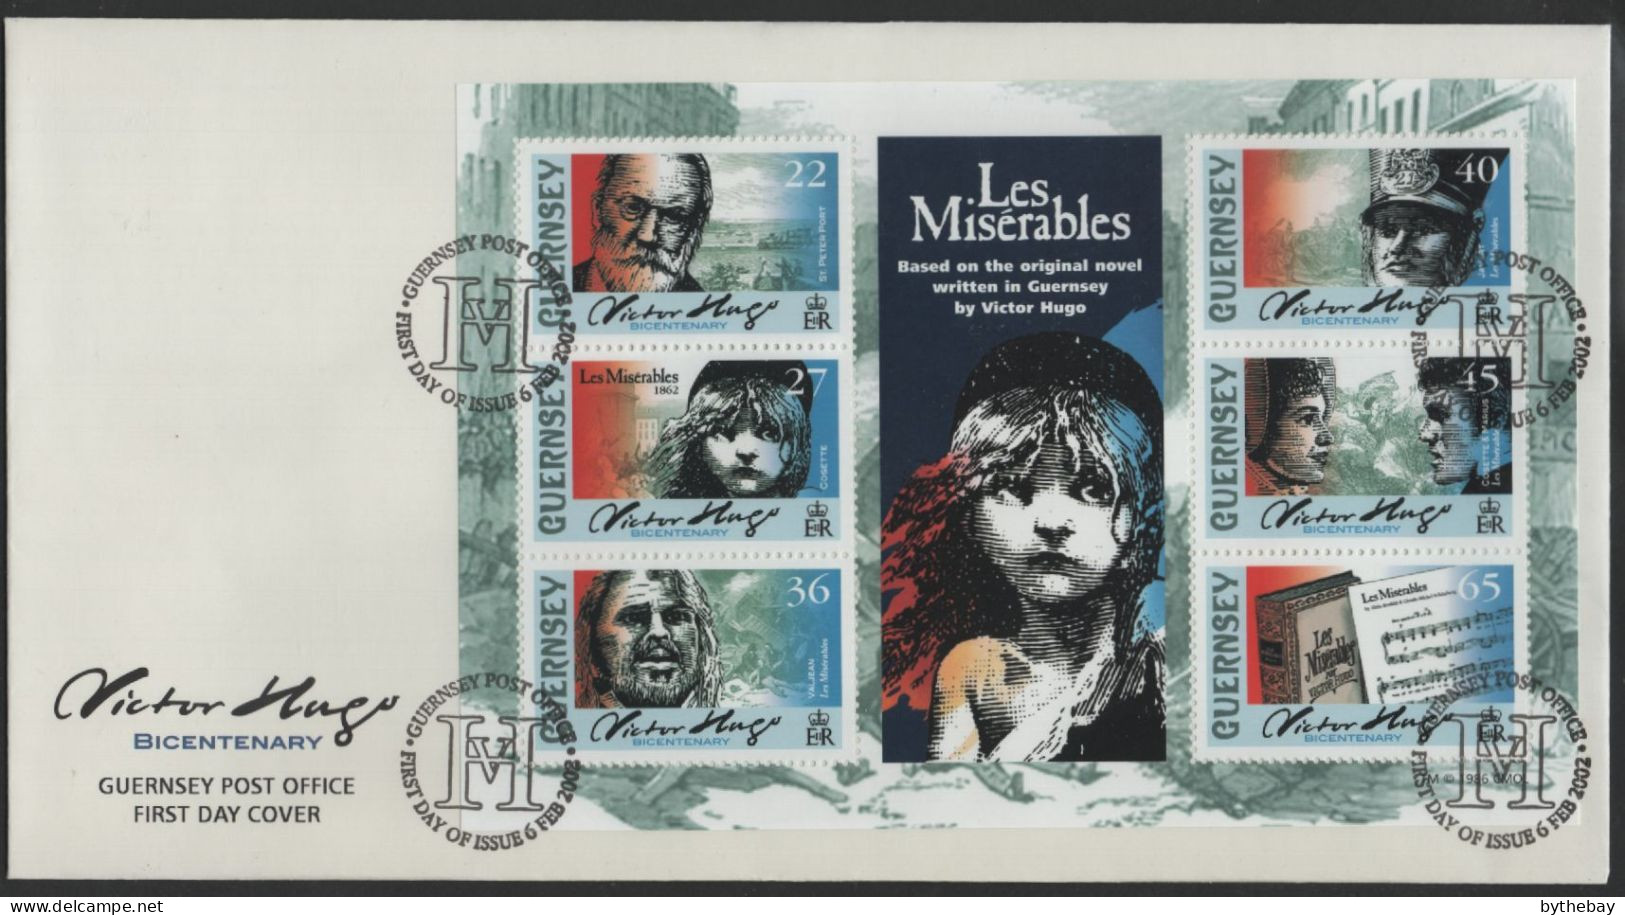 Guernsey 2002 FDC Sc 767a Les Miserables Victor Hugo 200th Birth Ann Sheet - Guernesey